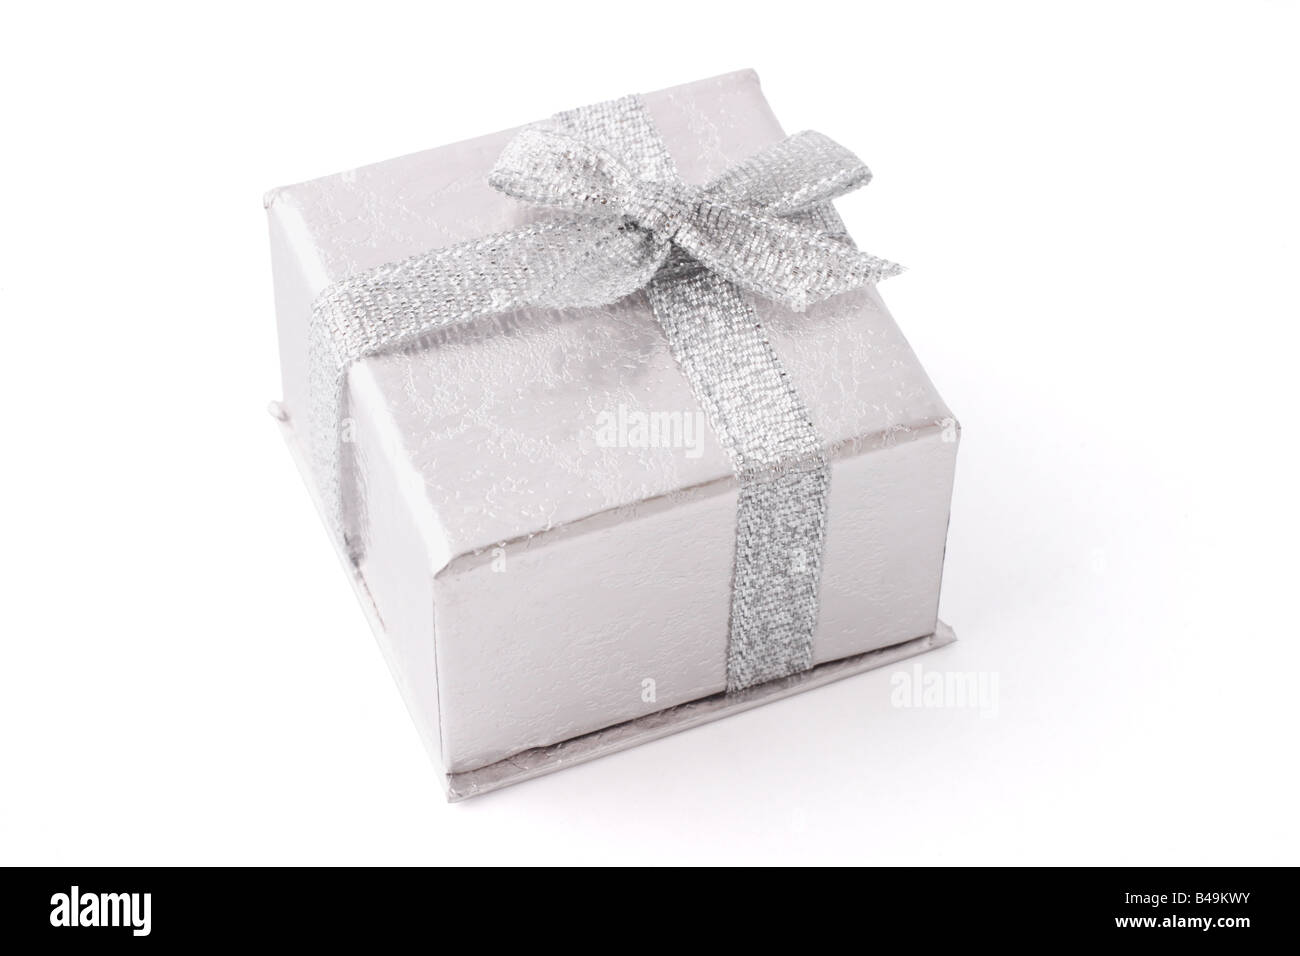 Gift Box or Present Box with Silver Ribbon Bow Isolated on White Background  Stock Illustration - Illustration of front, grey: 101115337